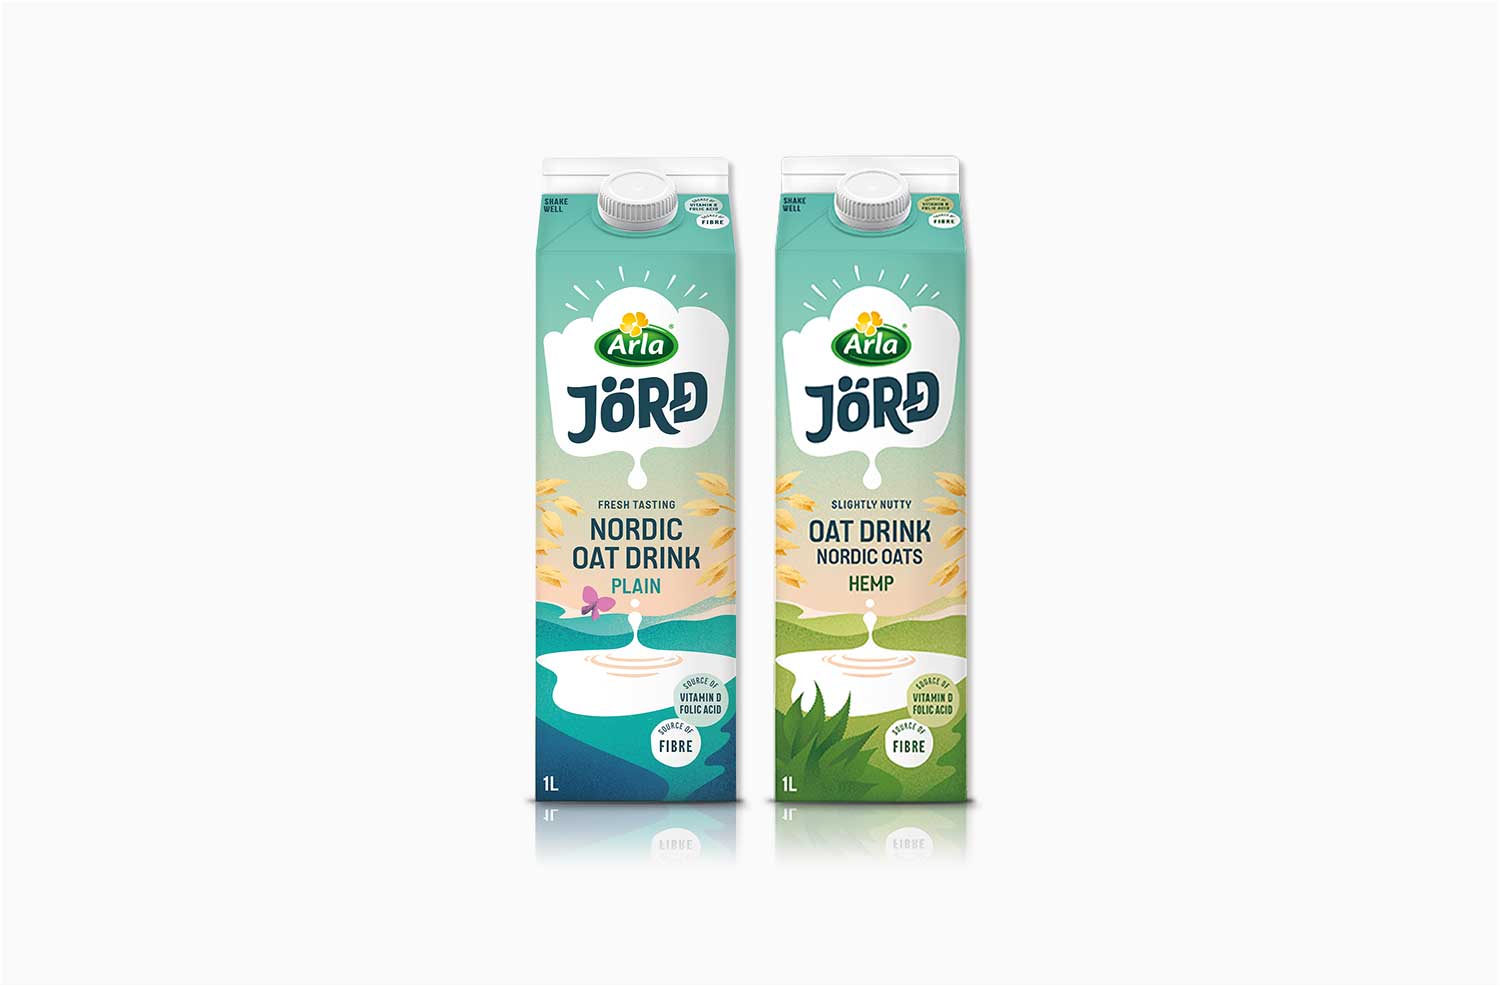 Embrace​ the exceptional​ taste of Nordic​ and deliciously oat based drinks with Arla Jord.